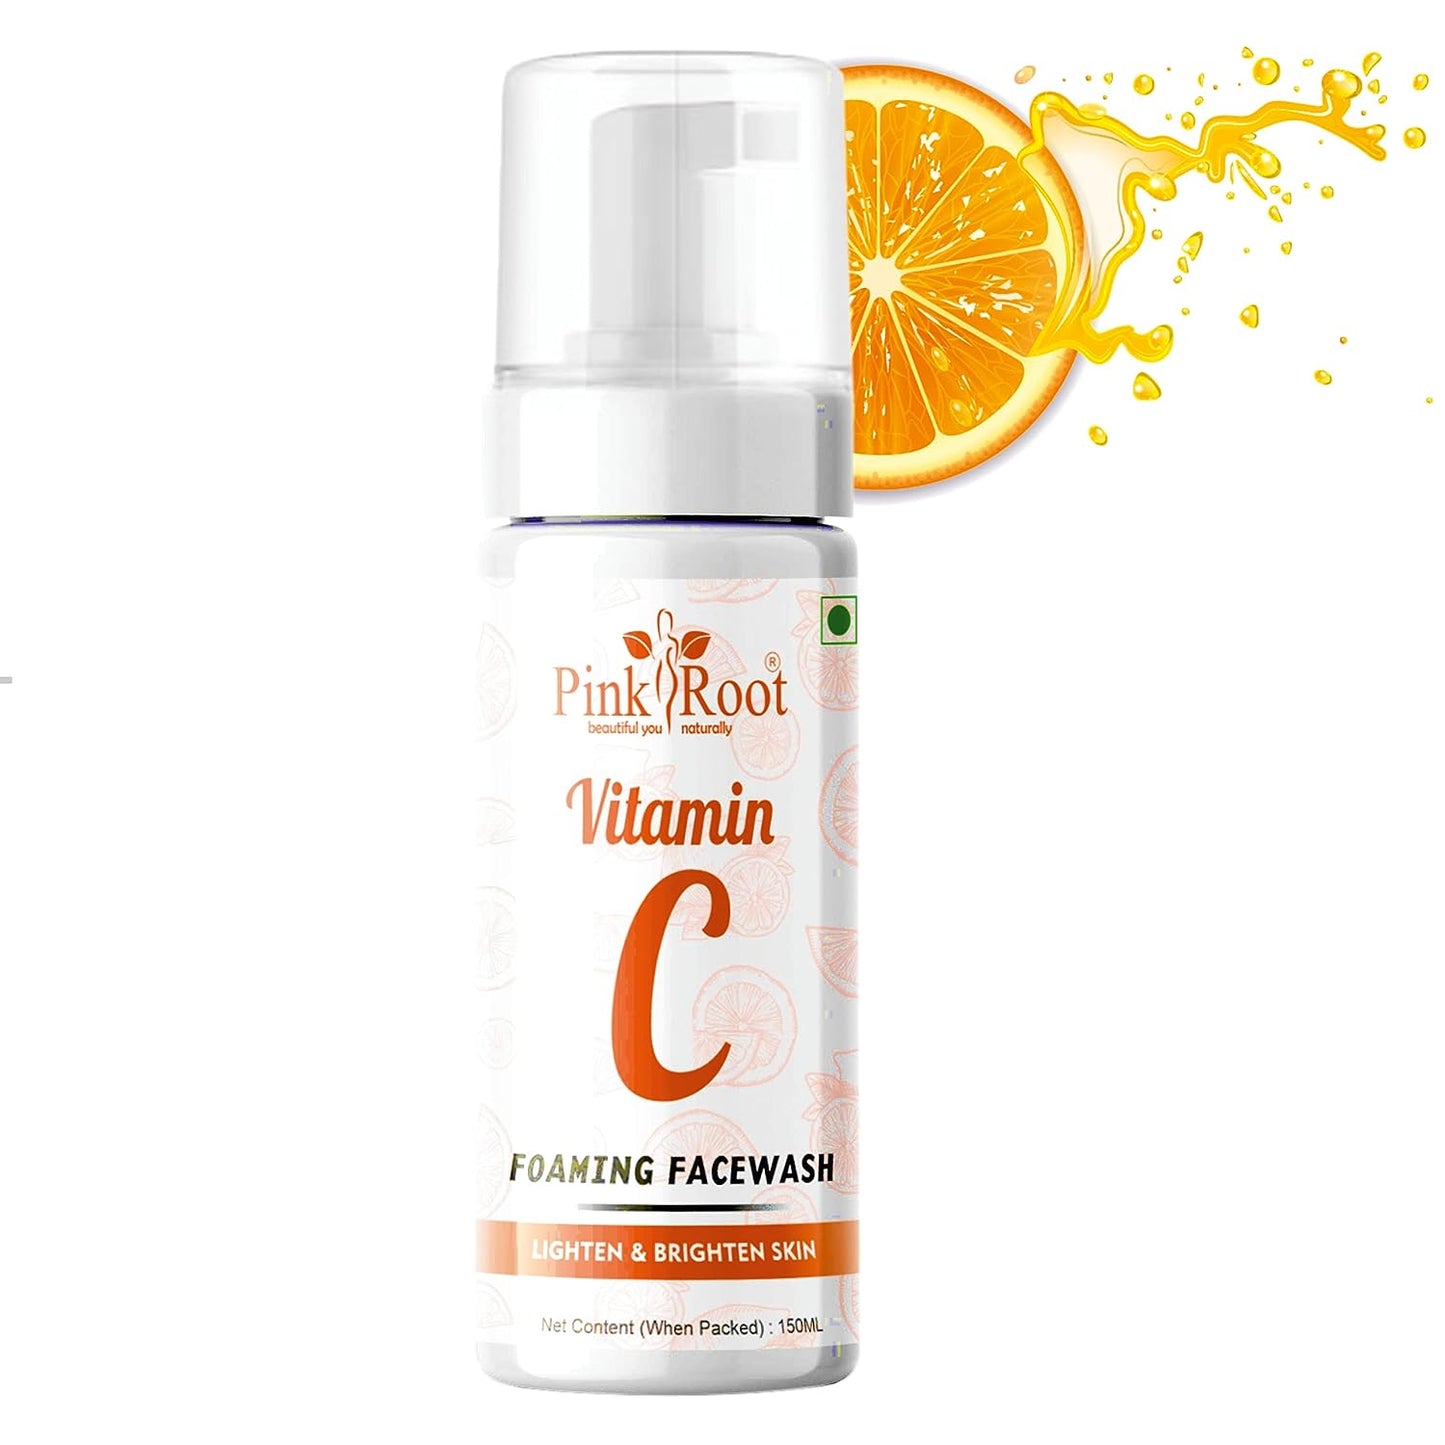 Pink Root Vitamin C Foaming Face Wash 150ml- Revitalize your skin with the power of Vitamin C, leaving it refreshed, radiant, and ready to glow with health and vitality